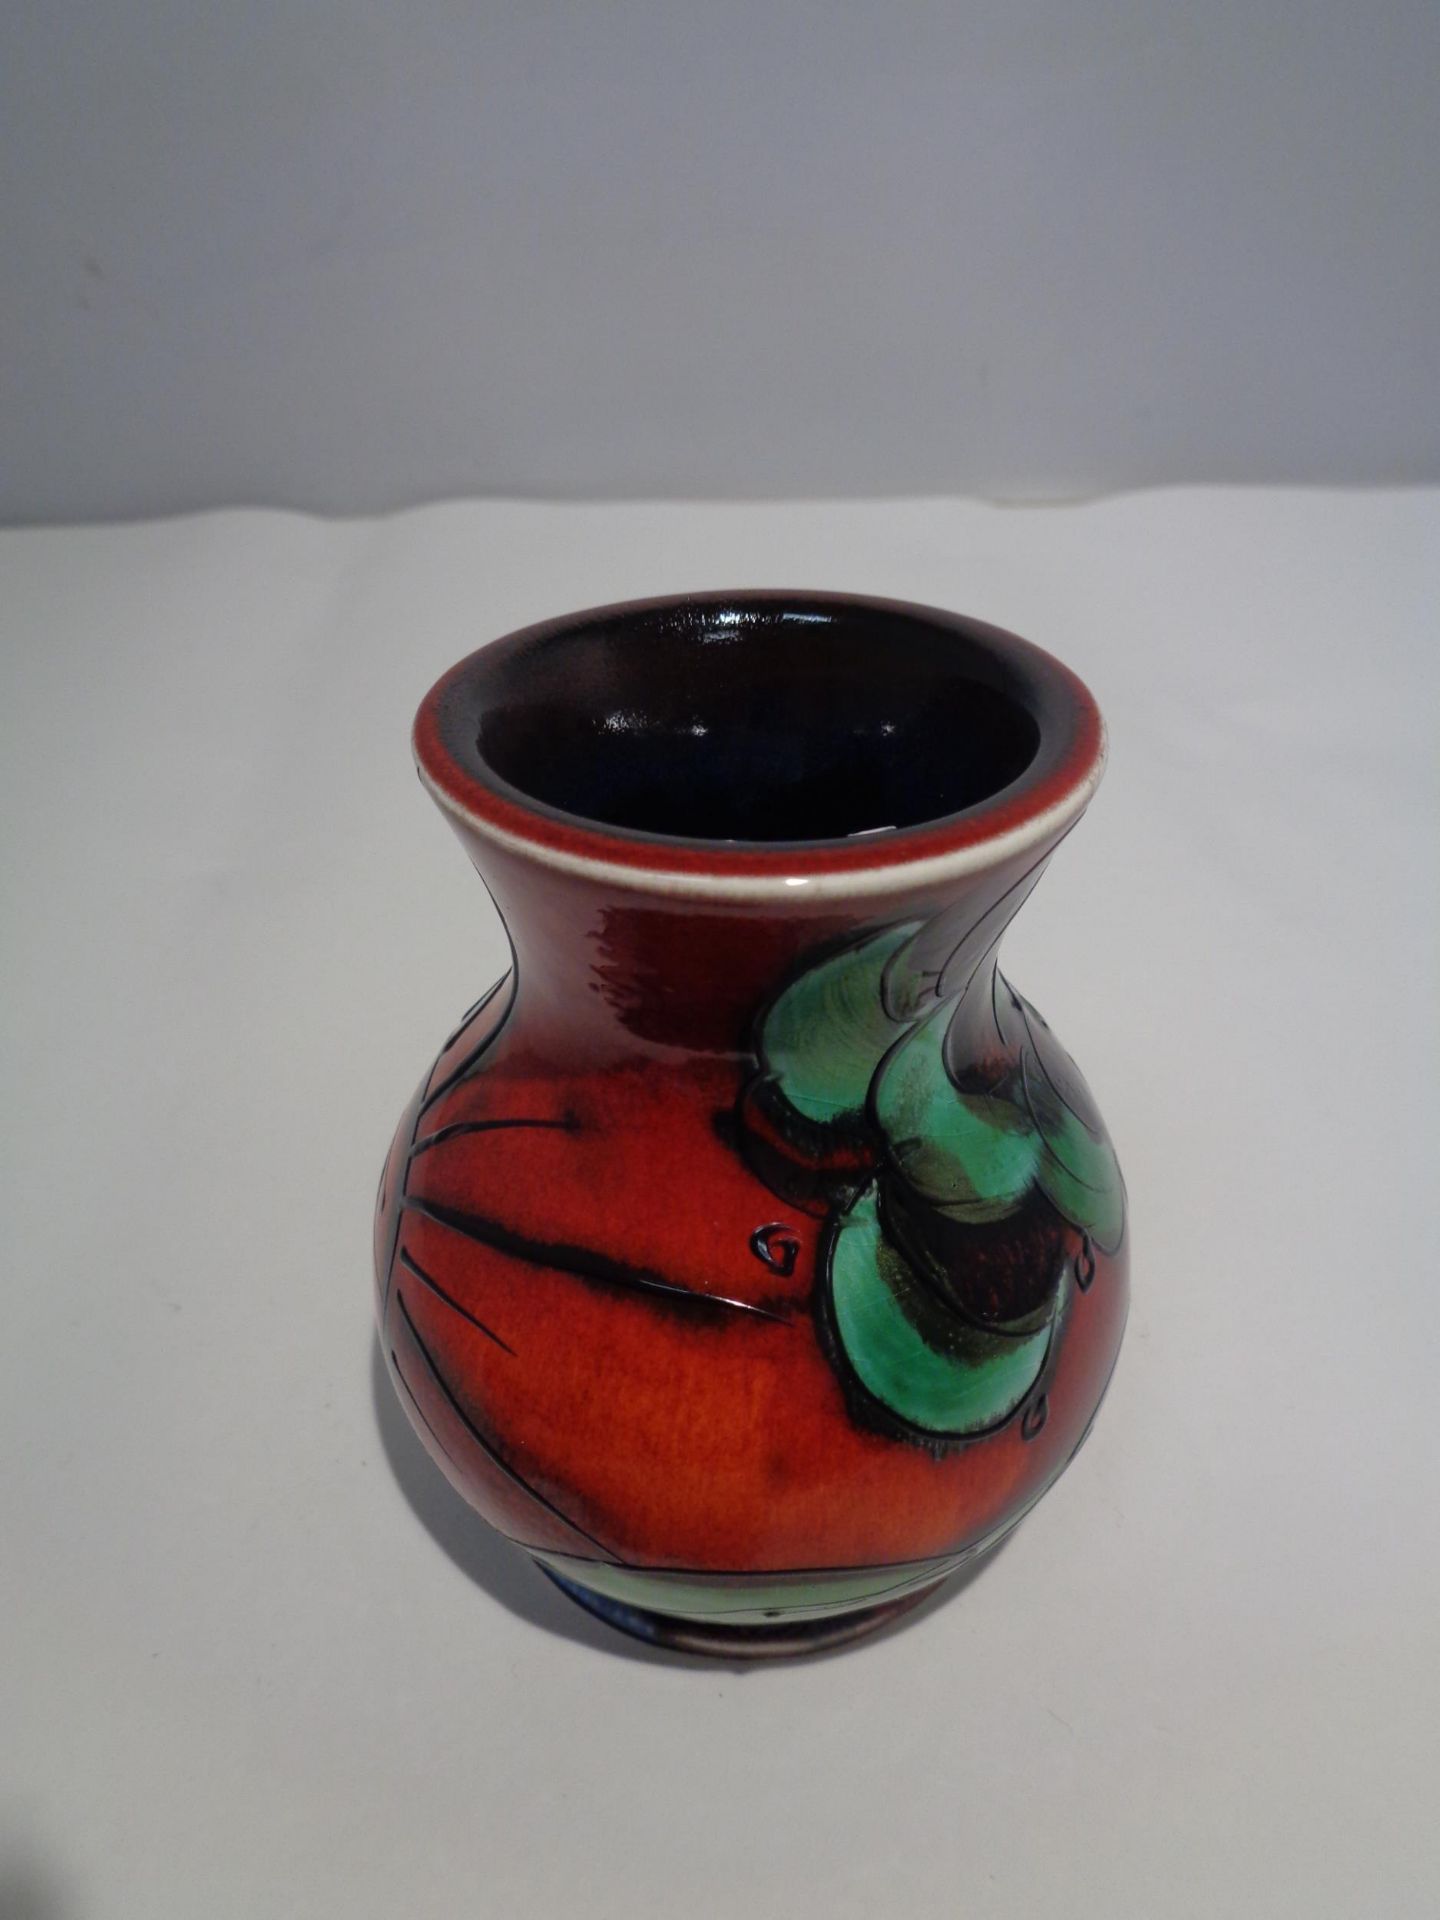 AN ANITA HARRIS HANDPAINTED AND SIGNED DECO TREE VASE - Image 2 of 3